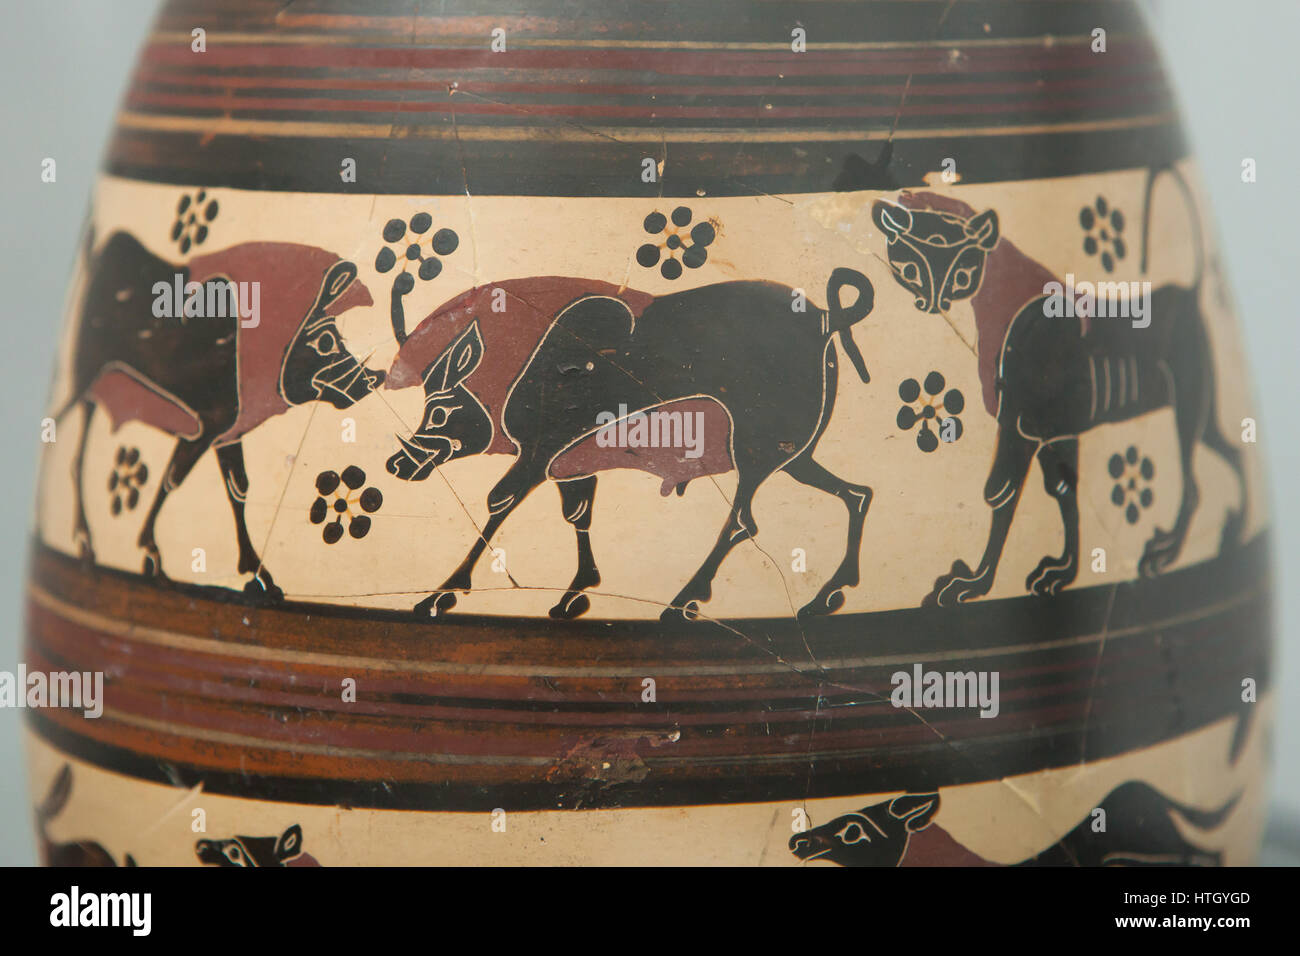 Wild boars depicted on the Corinthian black-figure oil jug from 650-625 BC on display in the Staatliche Antikensammlungen (Bavarian State Collection of Antiques) in Munich, Bavaria, Germany. Stock Photo